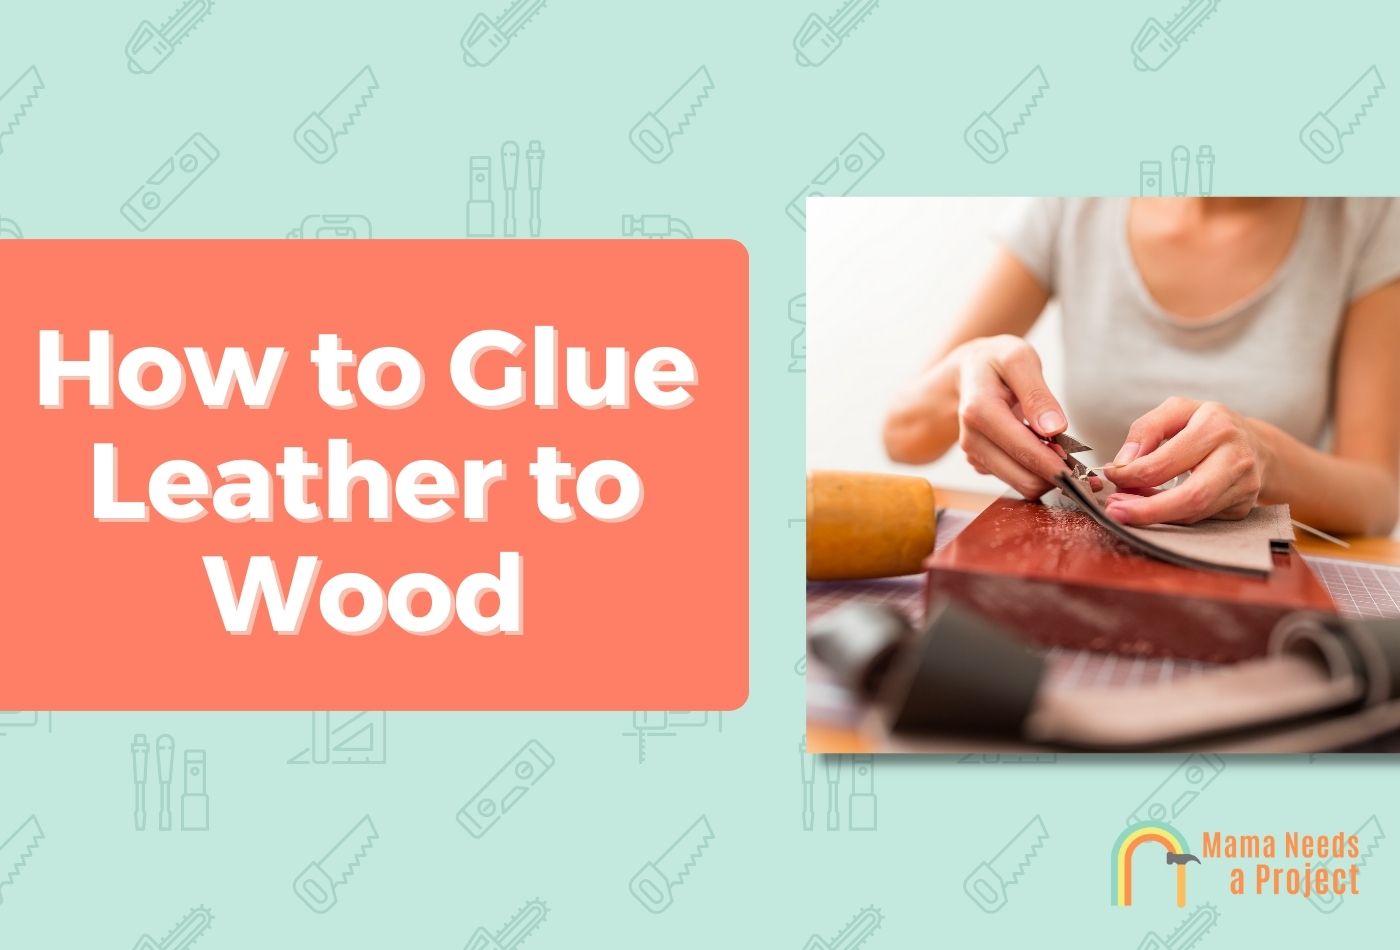 How to Glue Leather to Wood